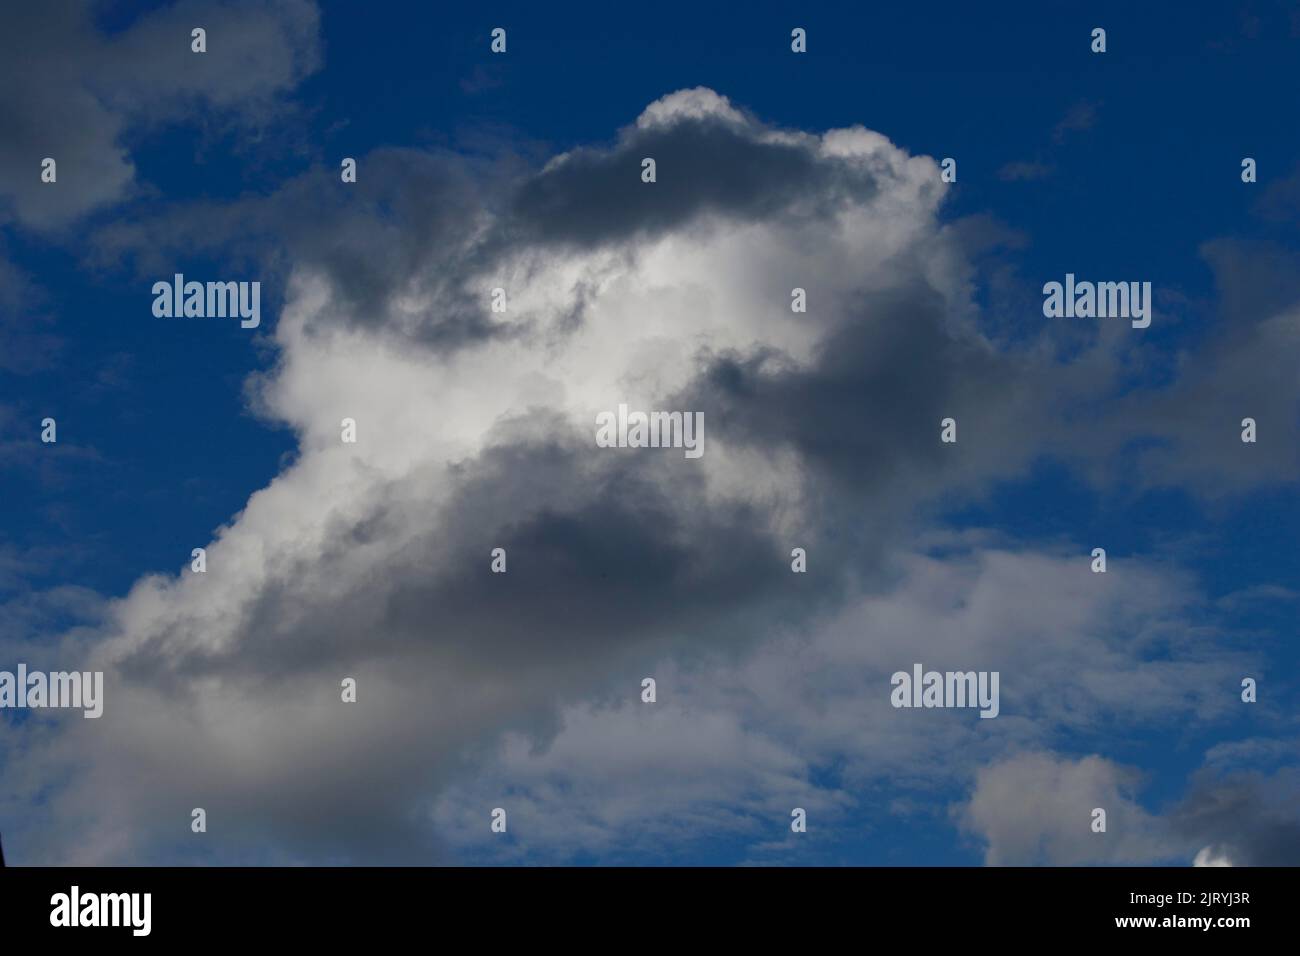 Nature, cloudy sky, Province of Quebec, Canada Stock Photo